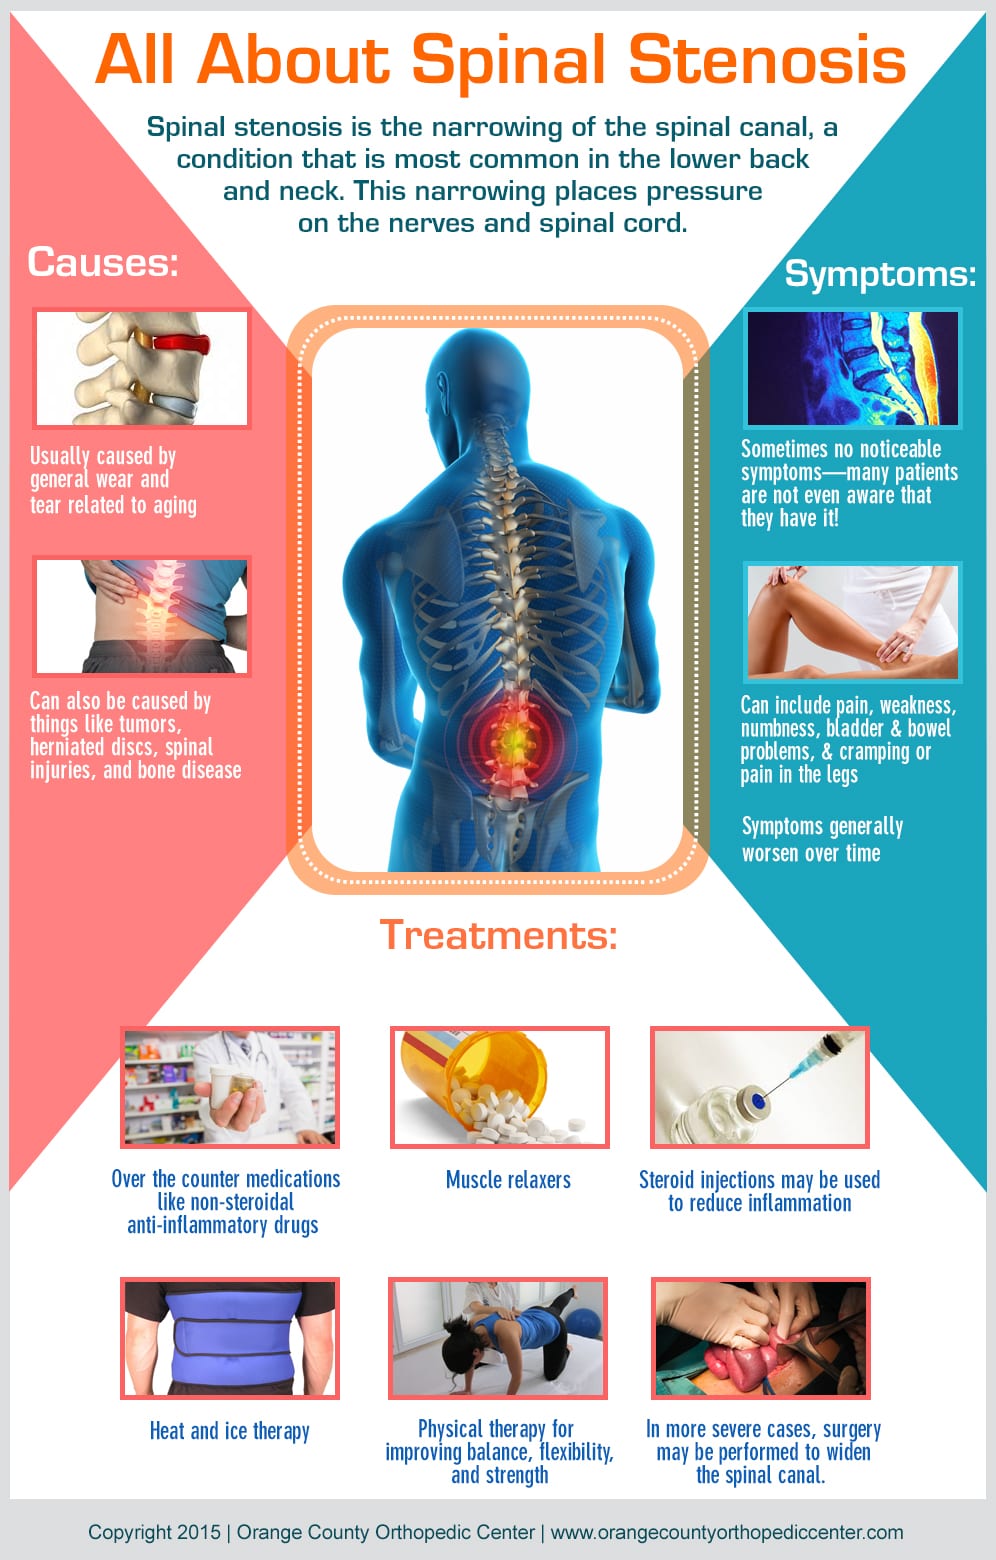 All About Spinal Stenosis Orange County Orthopedic Center - Orange County Orthopedic Center